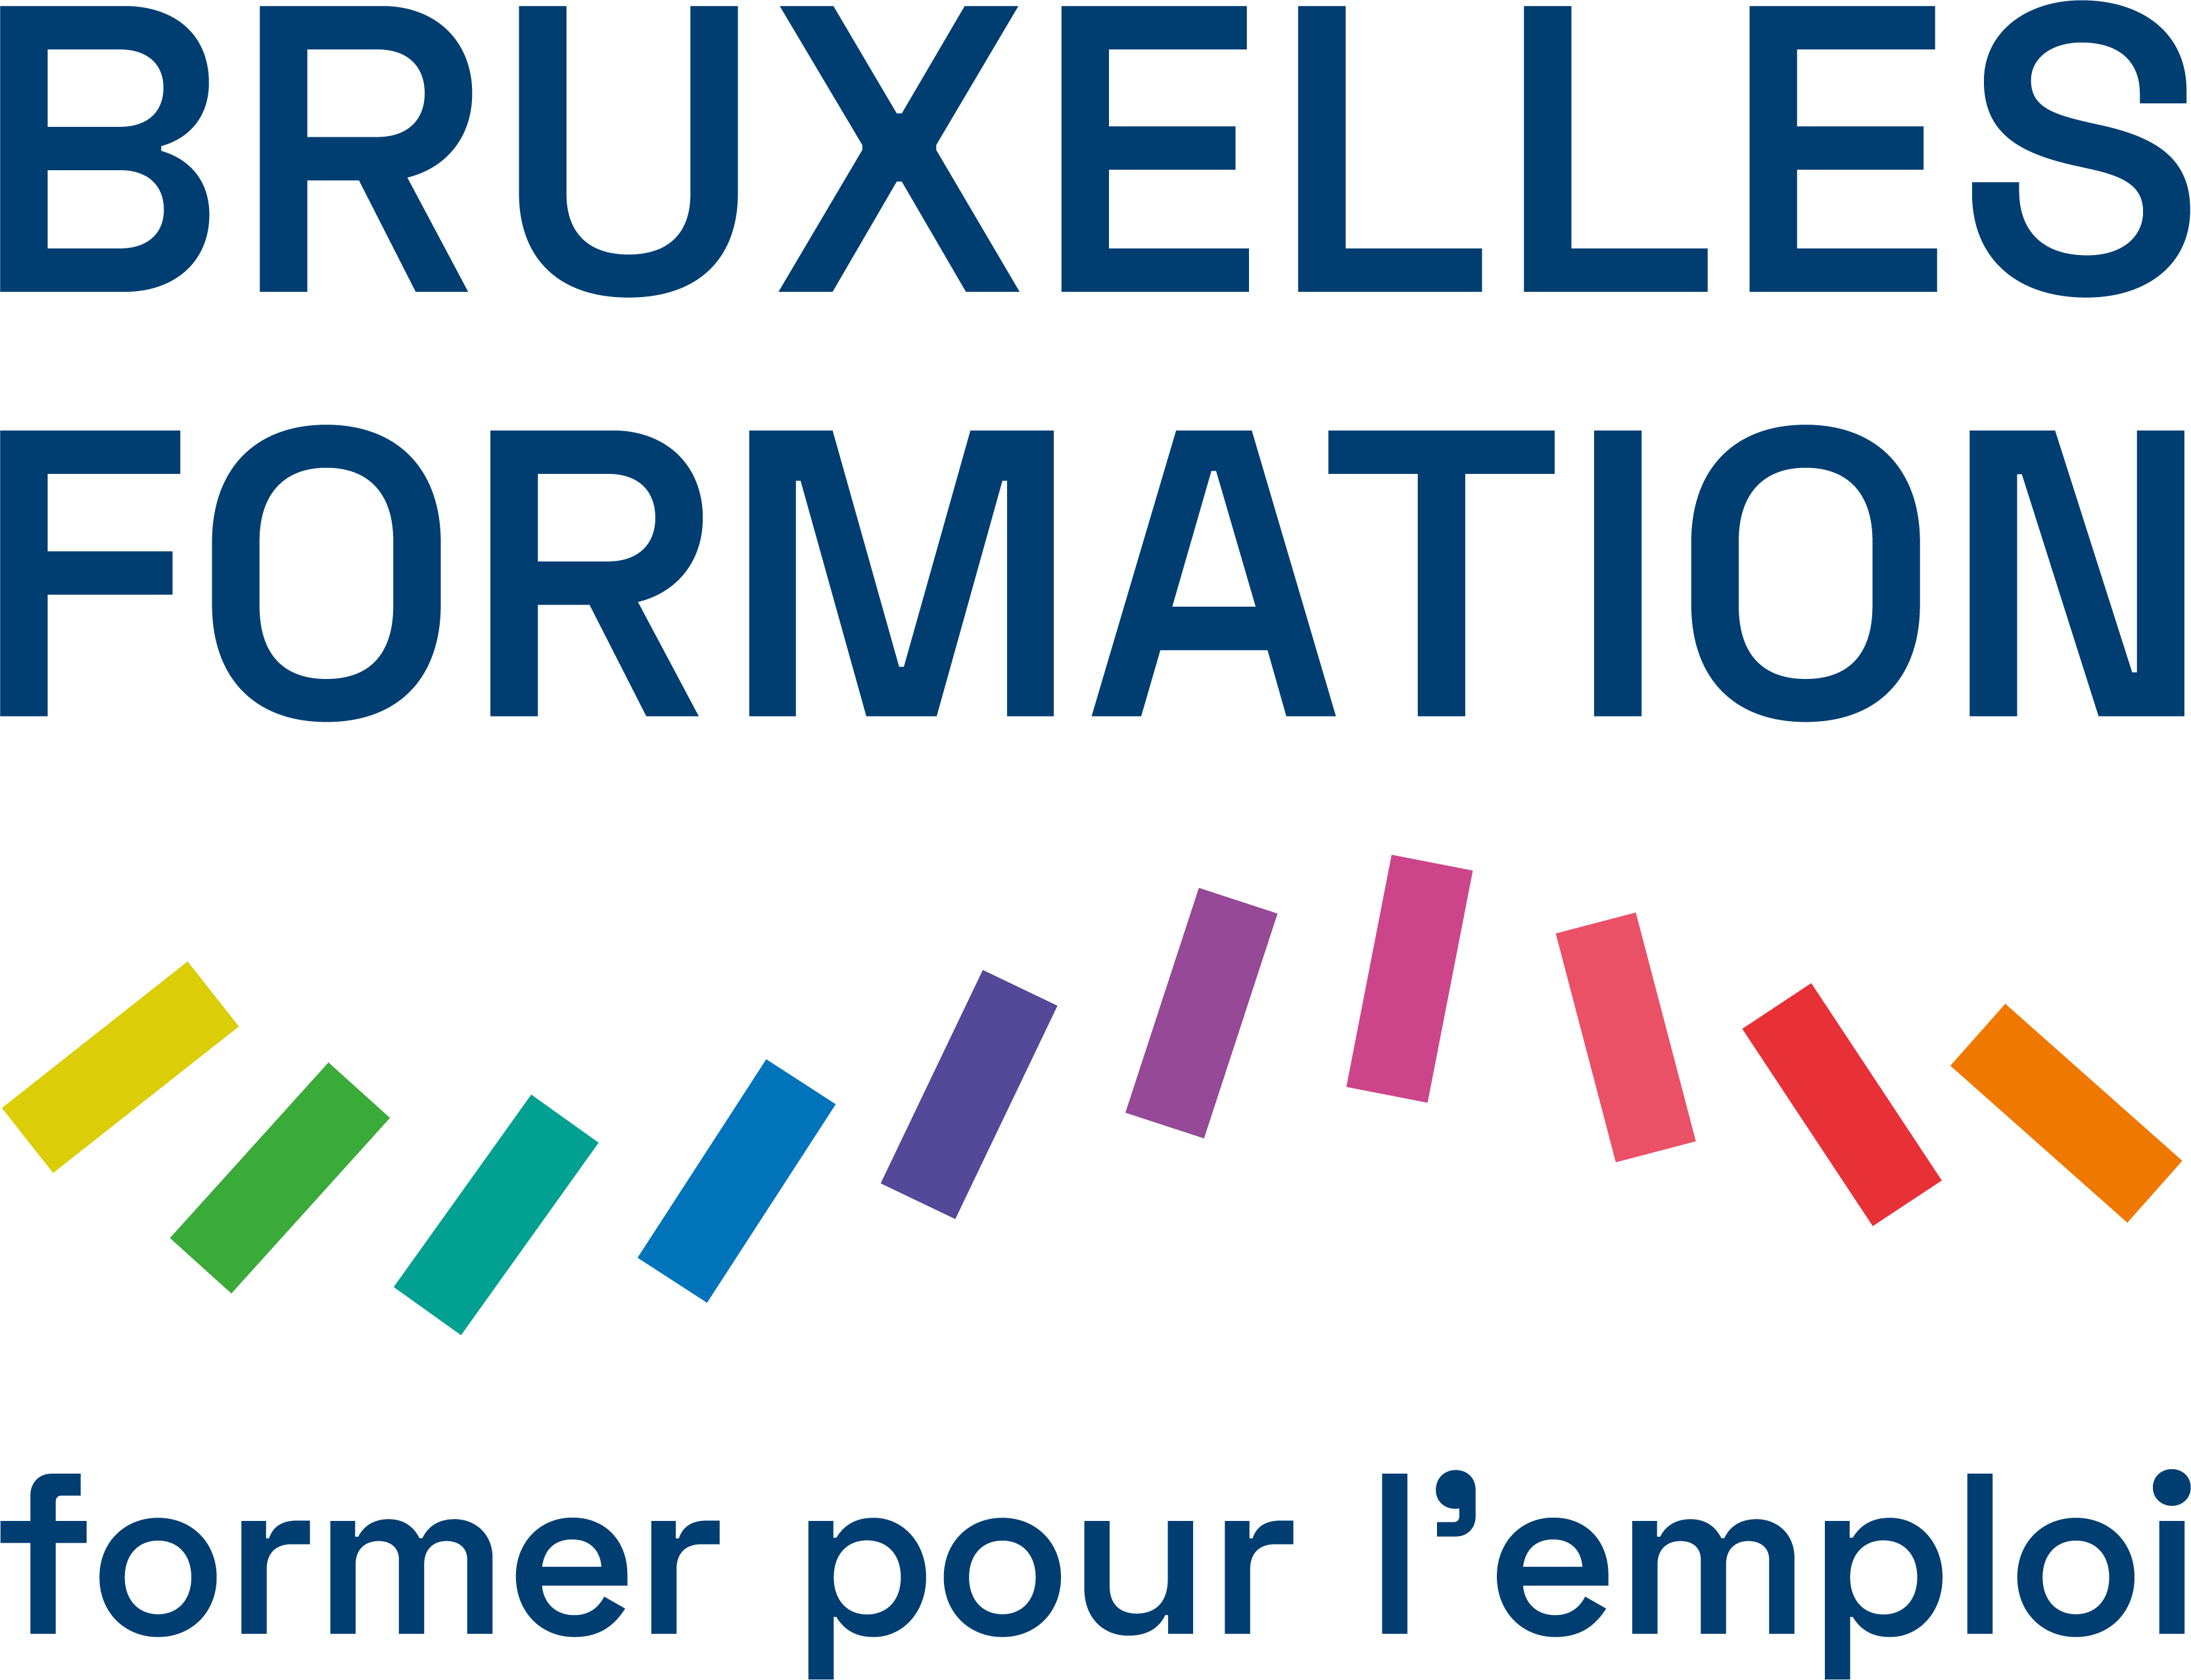 Bruxelles_Formation